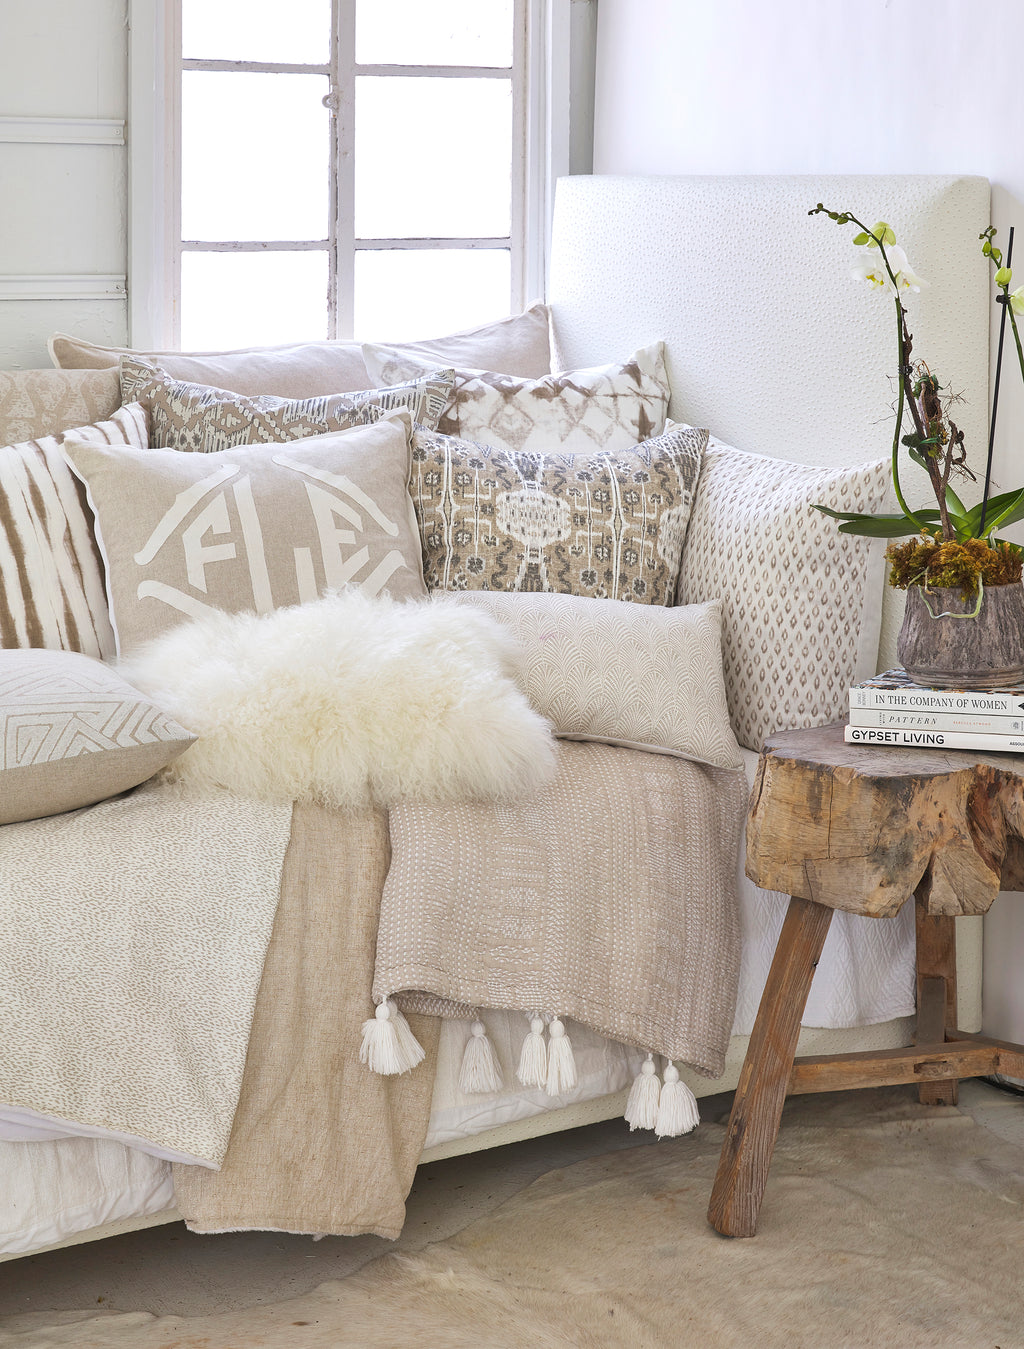 Accent pillows can add pizzazz to your home decor